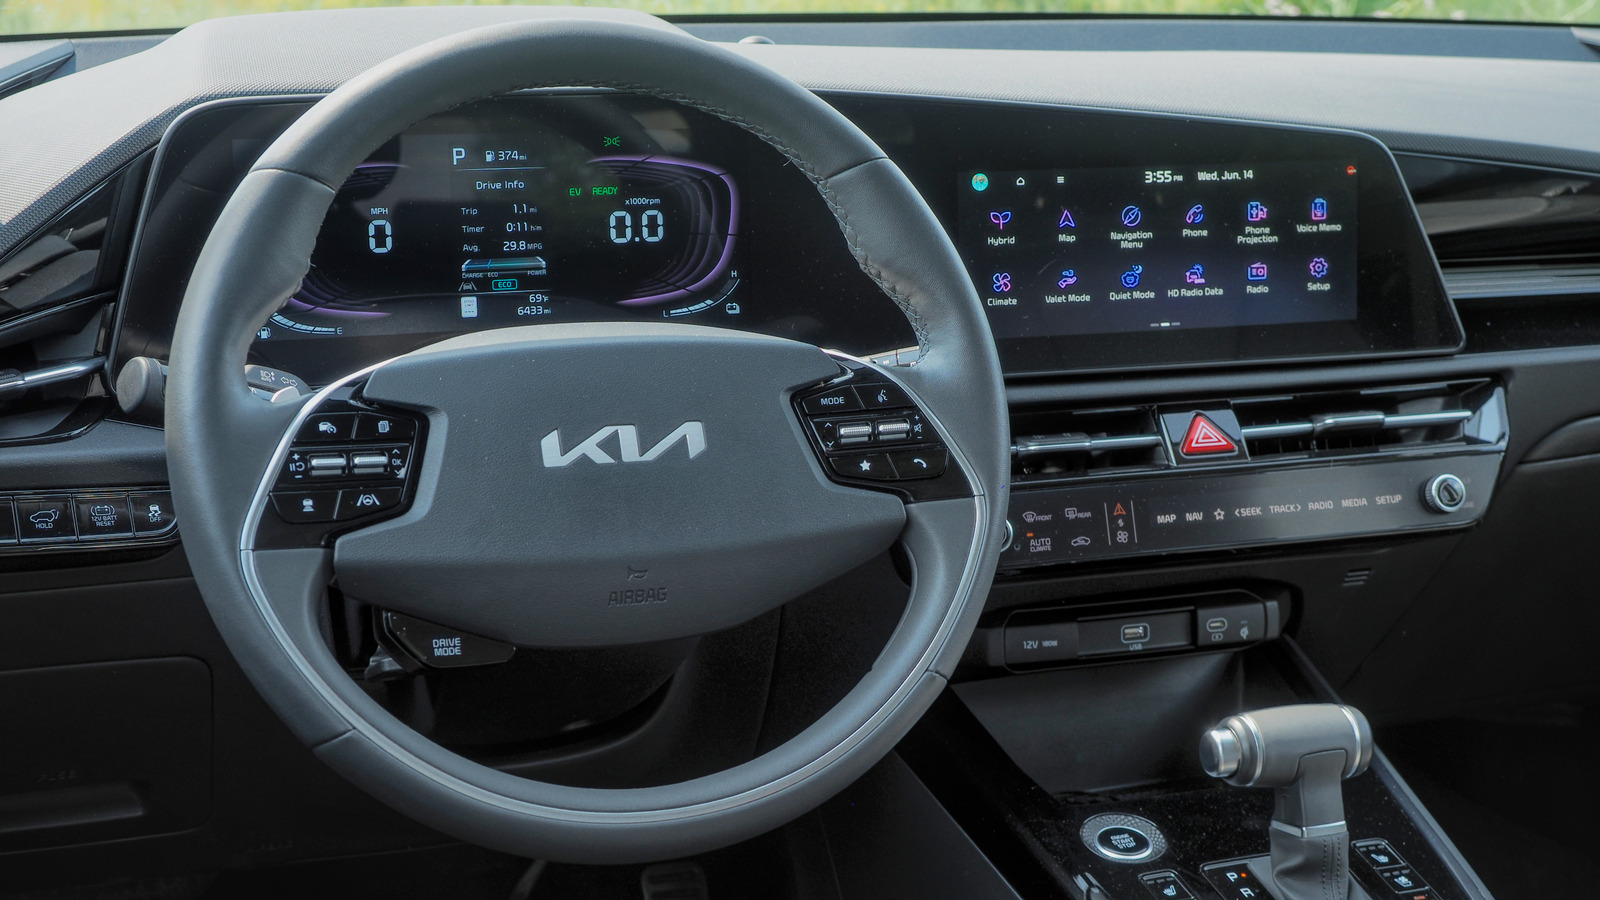 This Kia’s cabin feature is a genius all automakers should steal